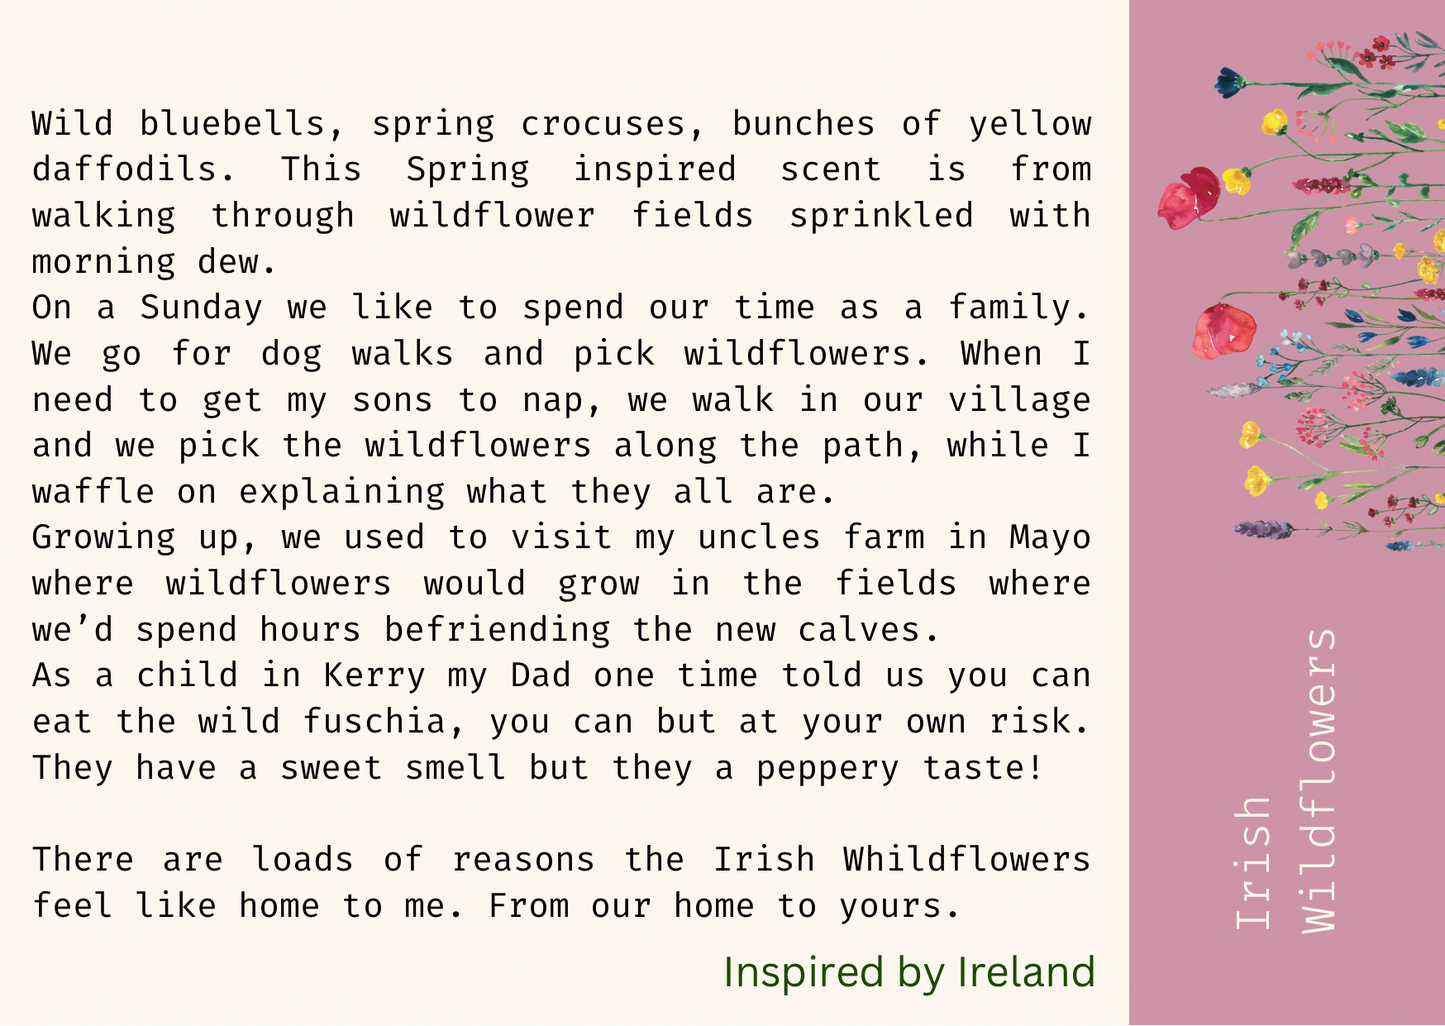 Inspired by Ireland Discovery Box